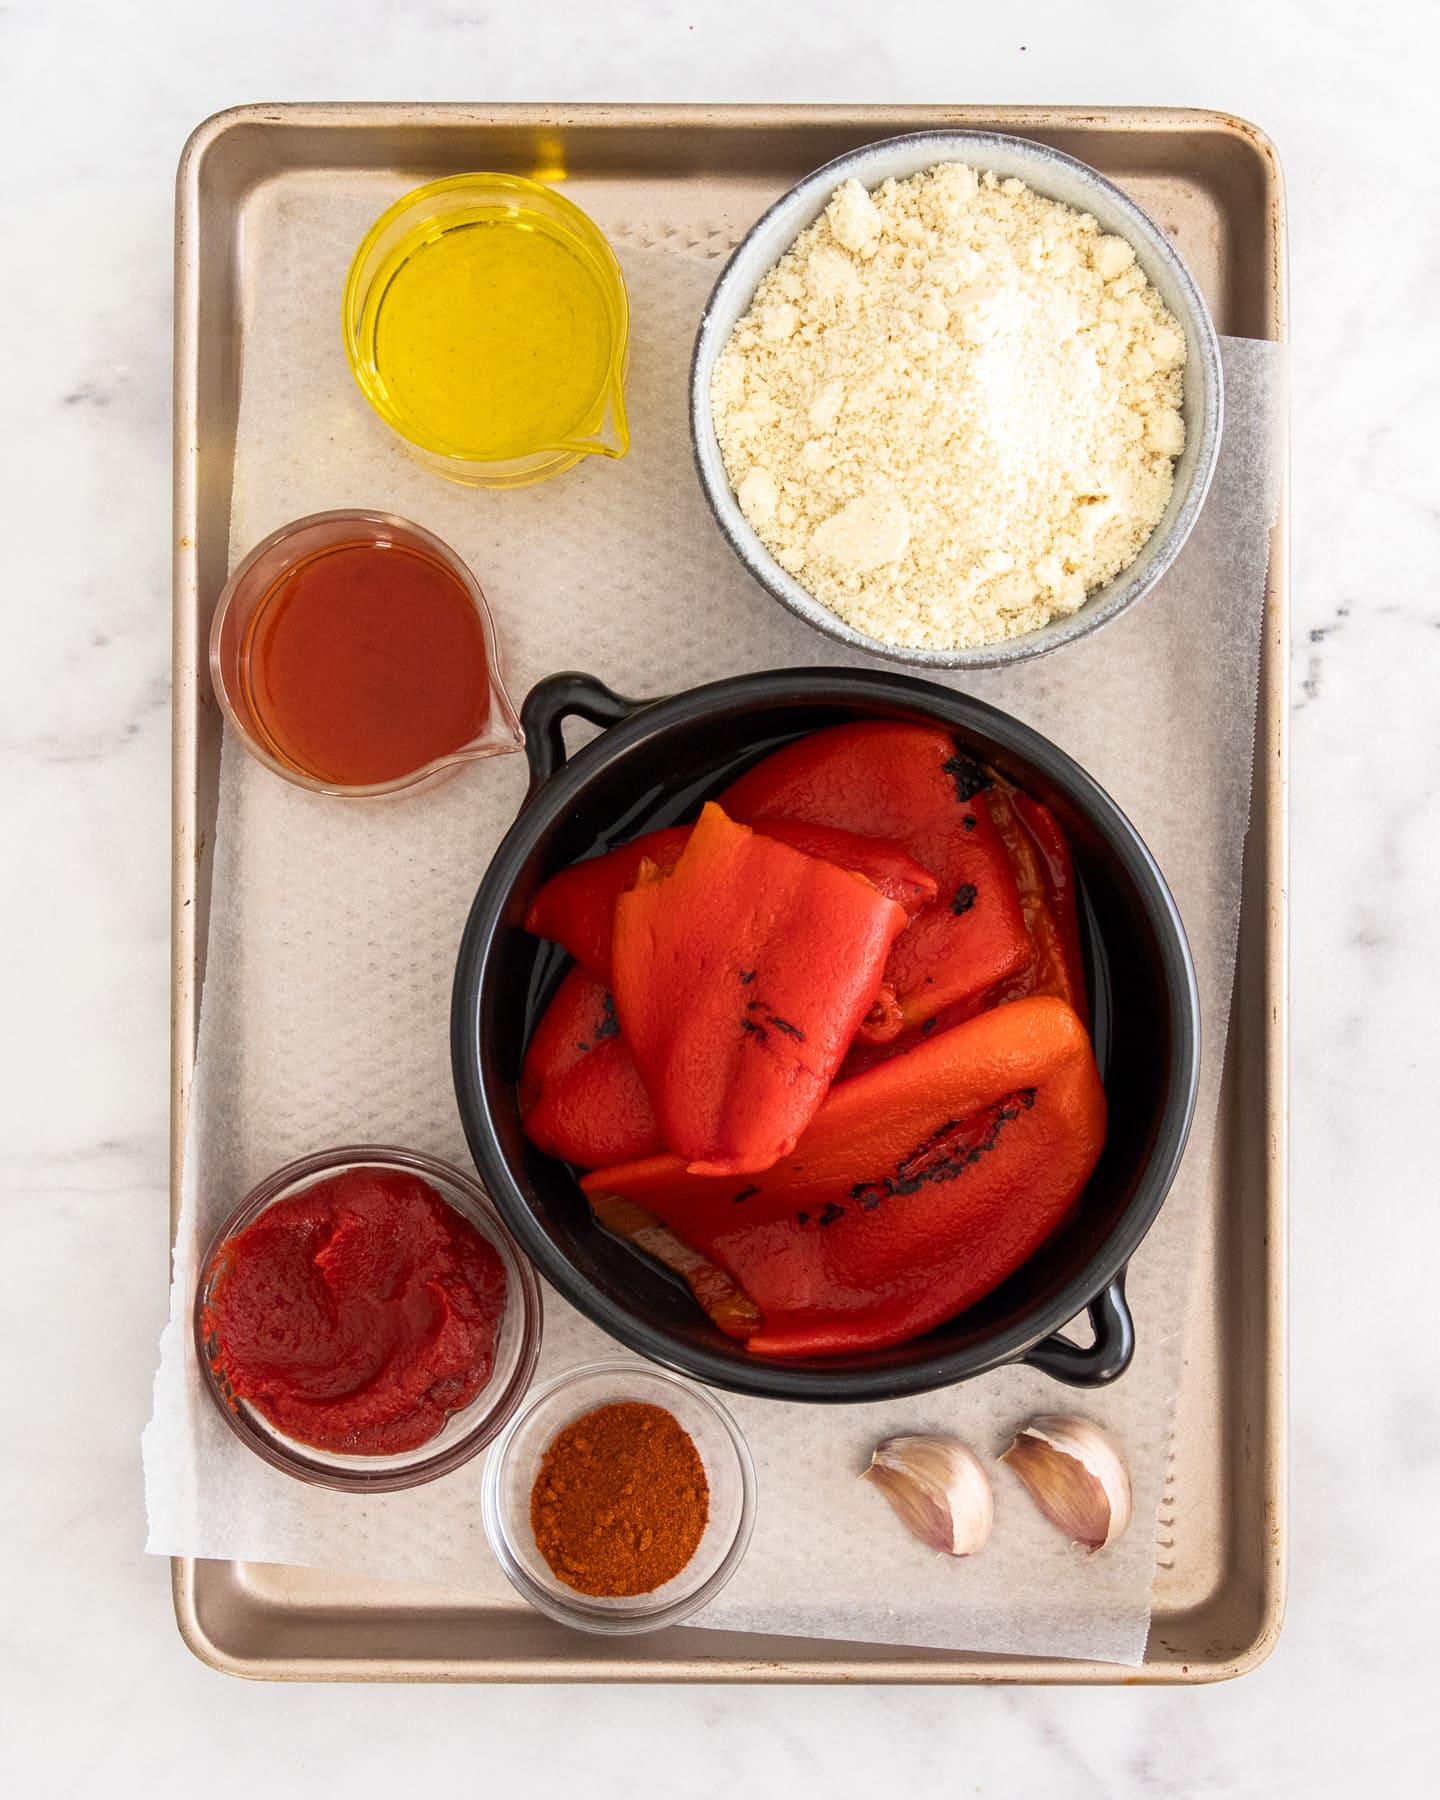 Ingredients for romesco sauce on a baking tray.